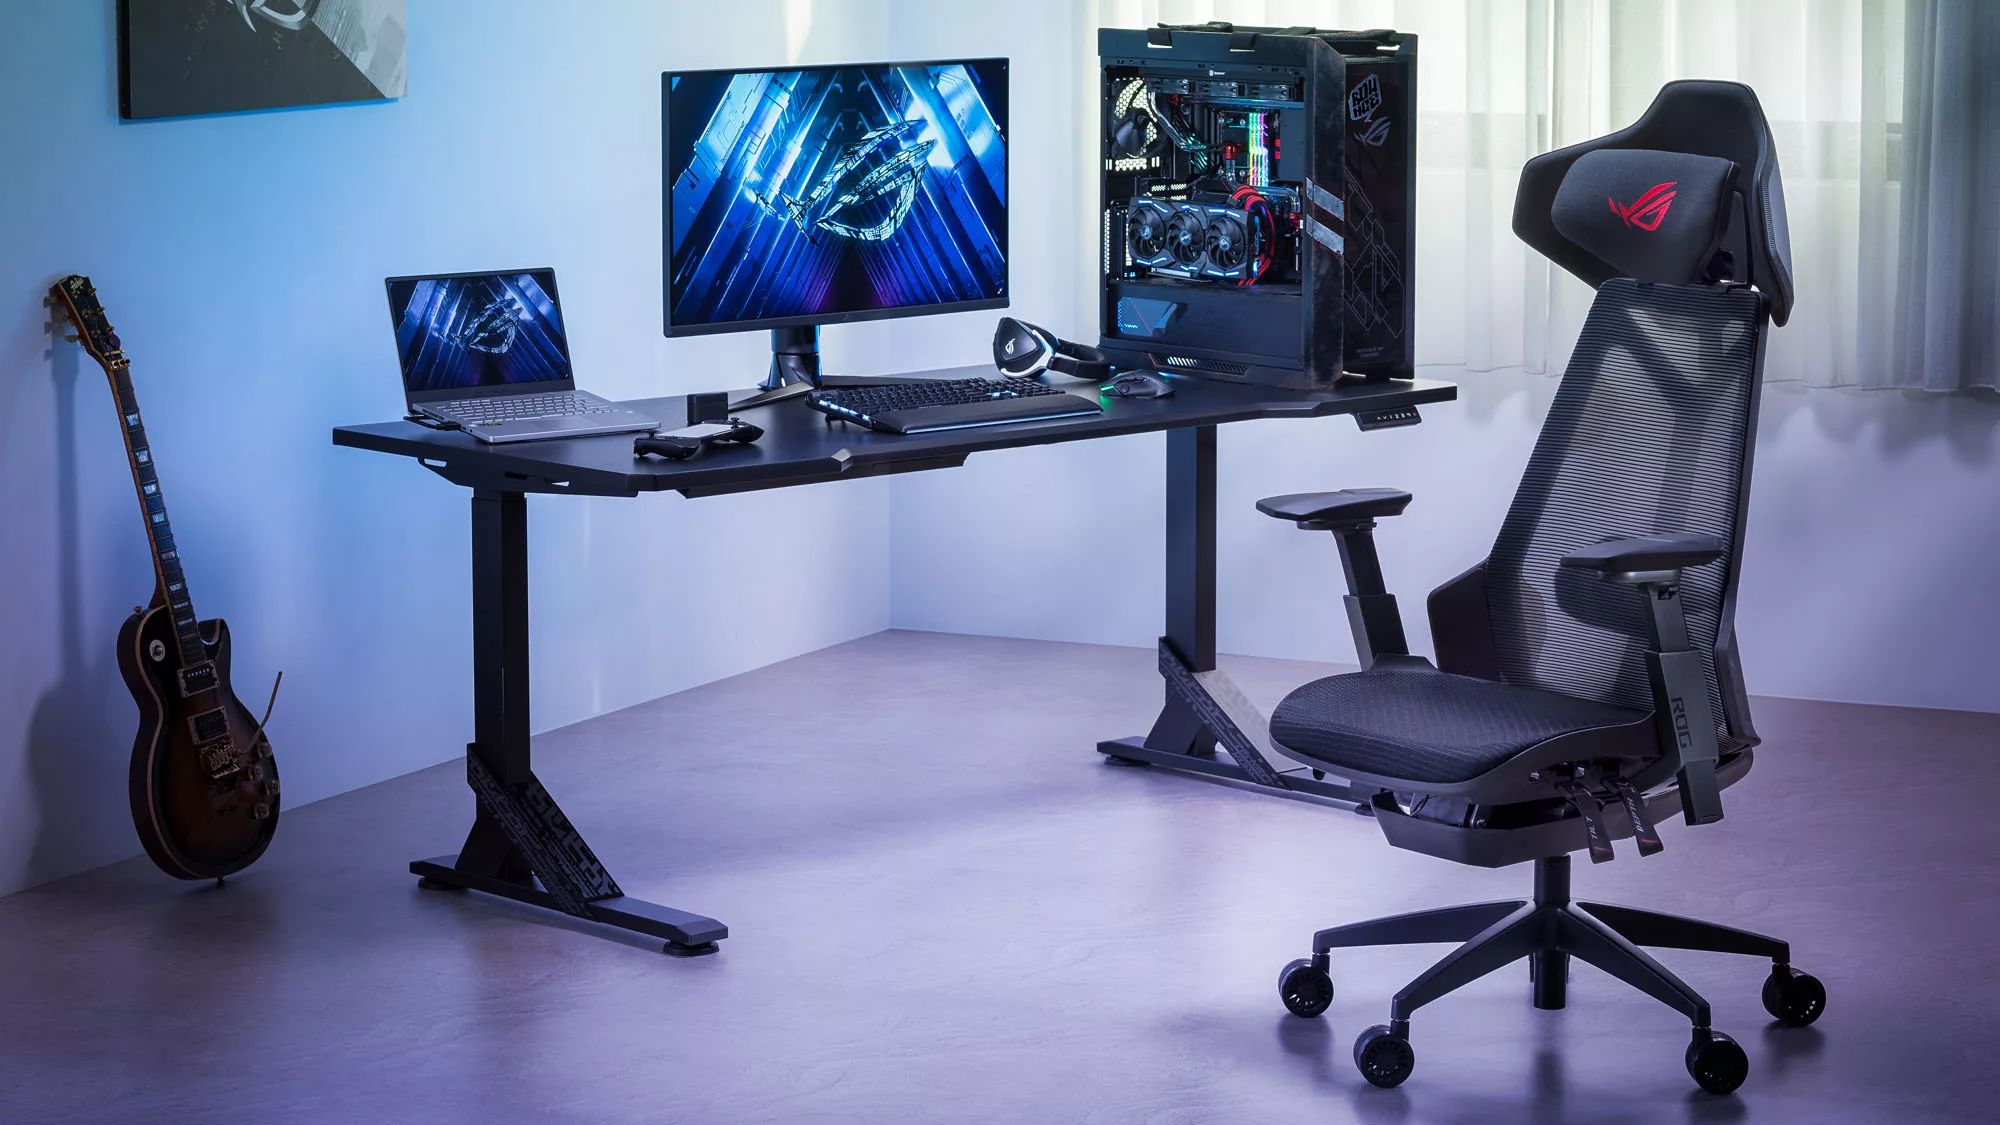 The ROG Destrier chair in a white room next to a desk with a gaming PC on top.